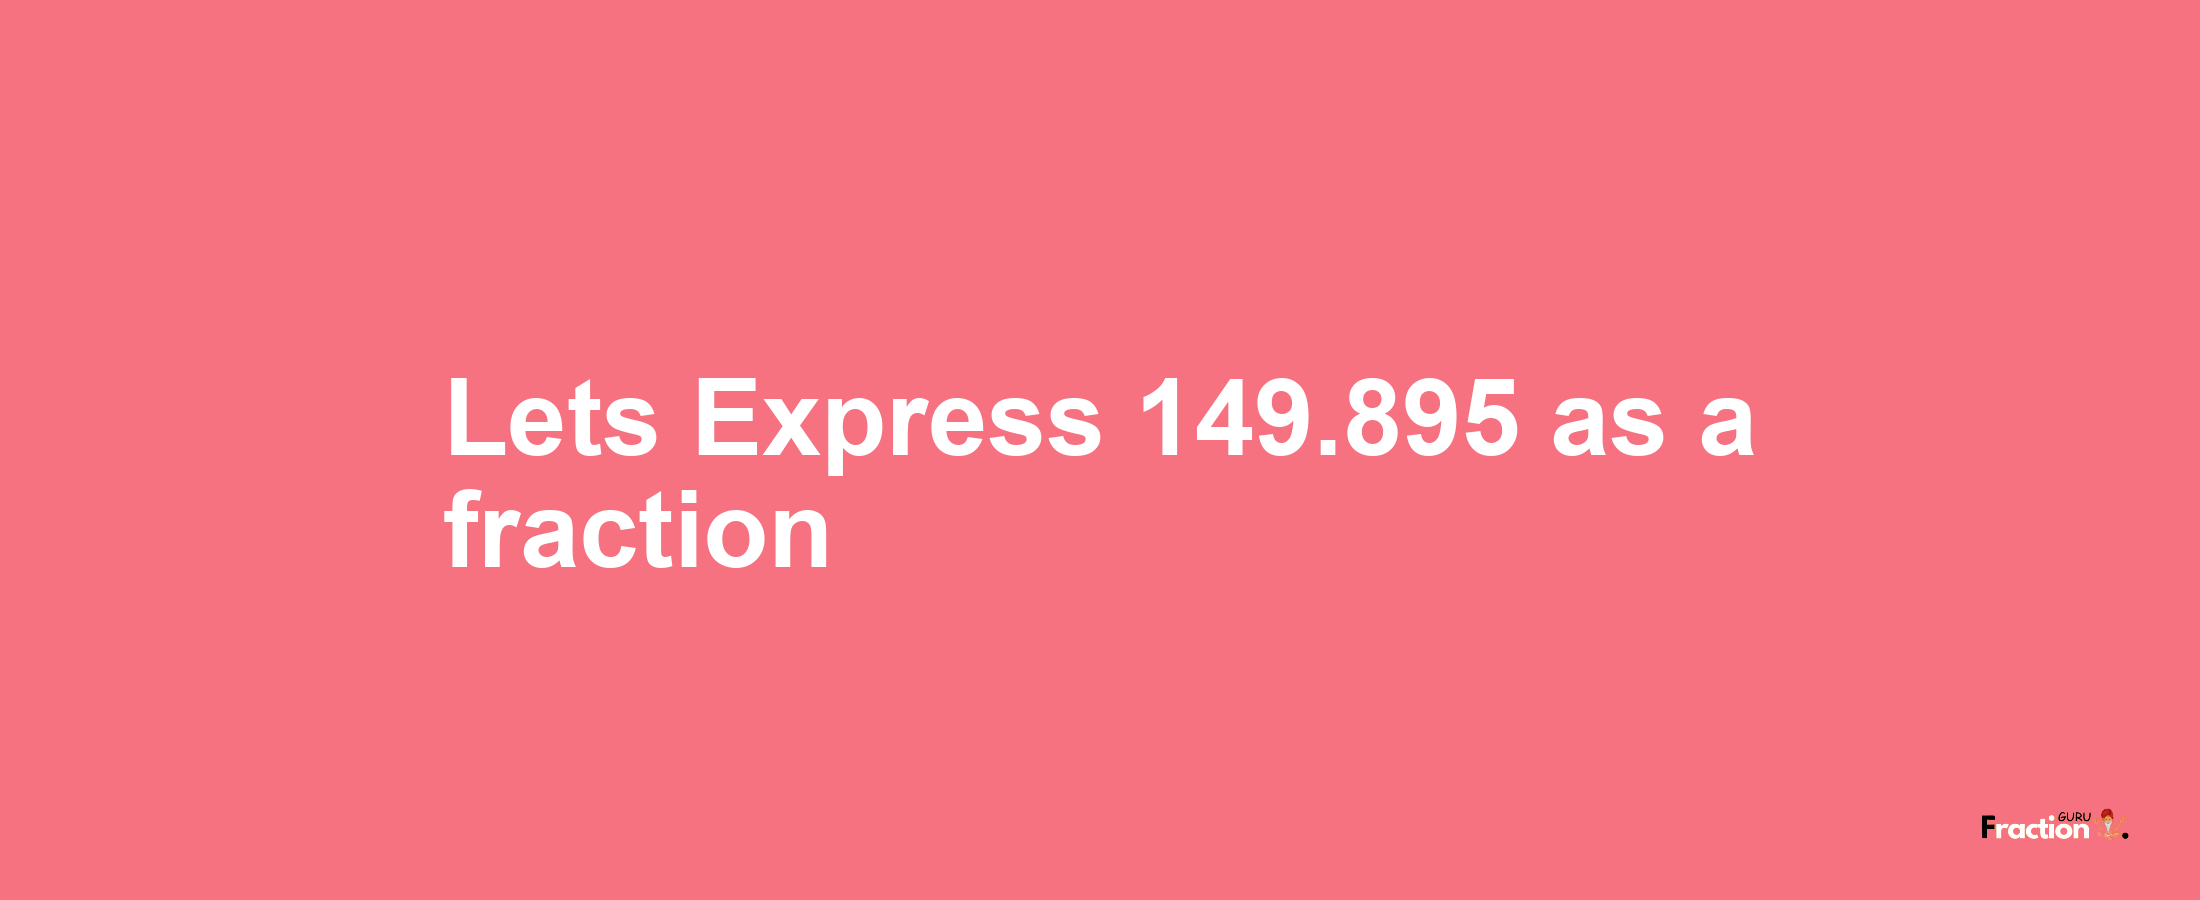 Lets Express 149.895 as afraction